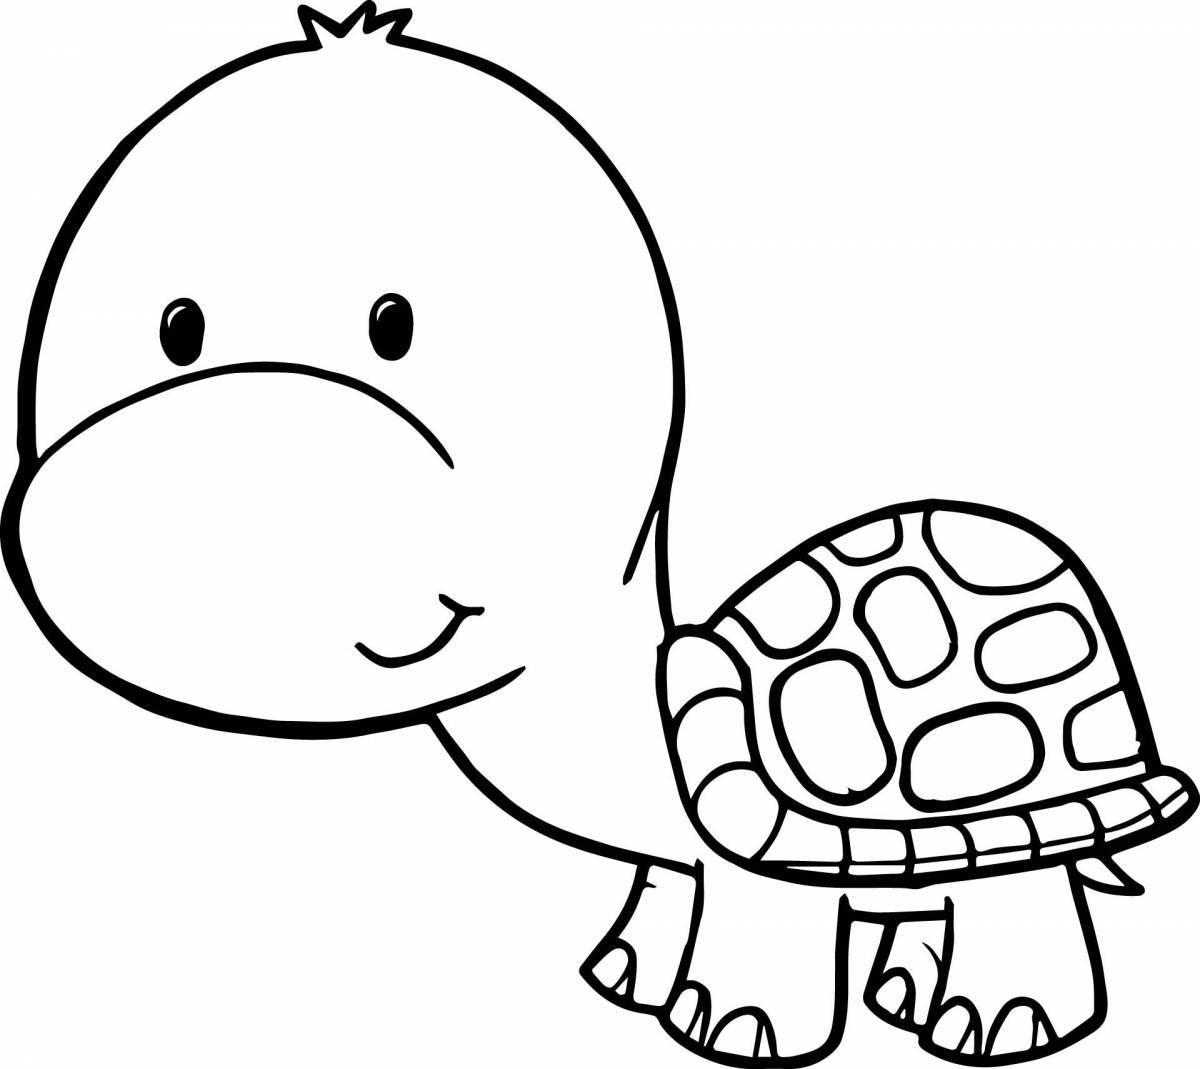 Turtle for kids #4